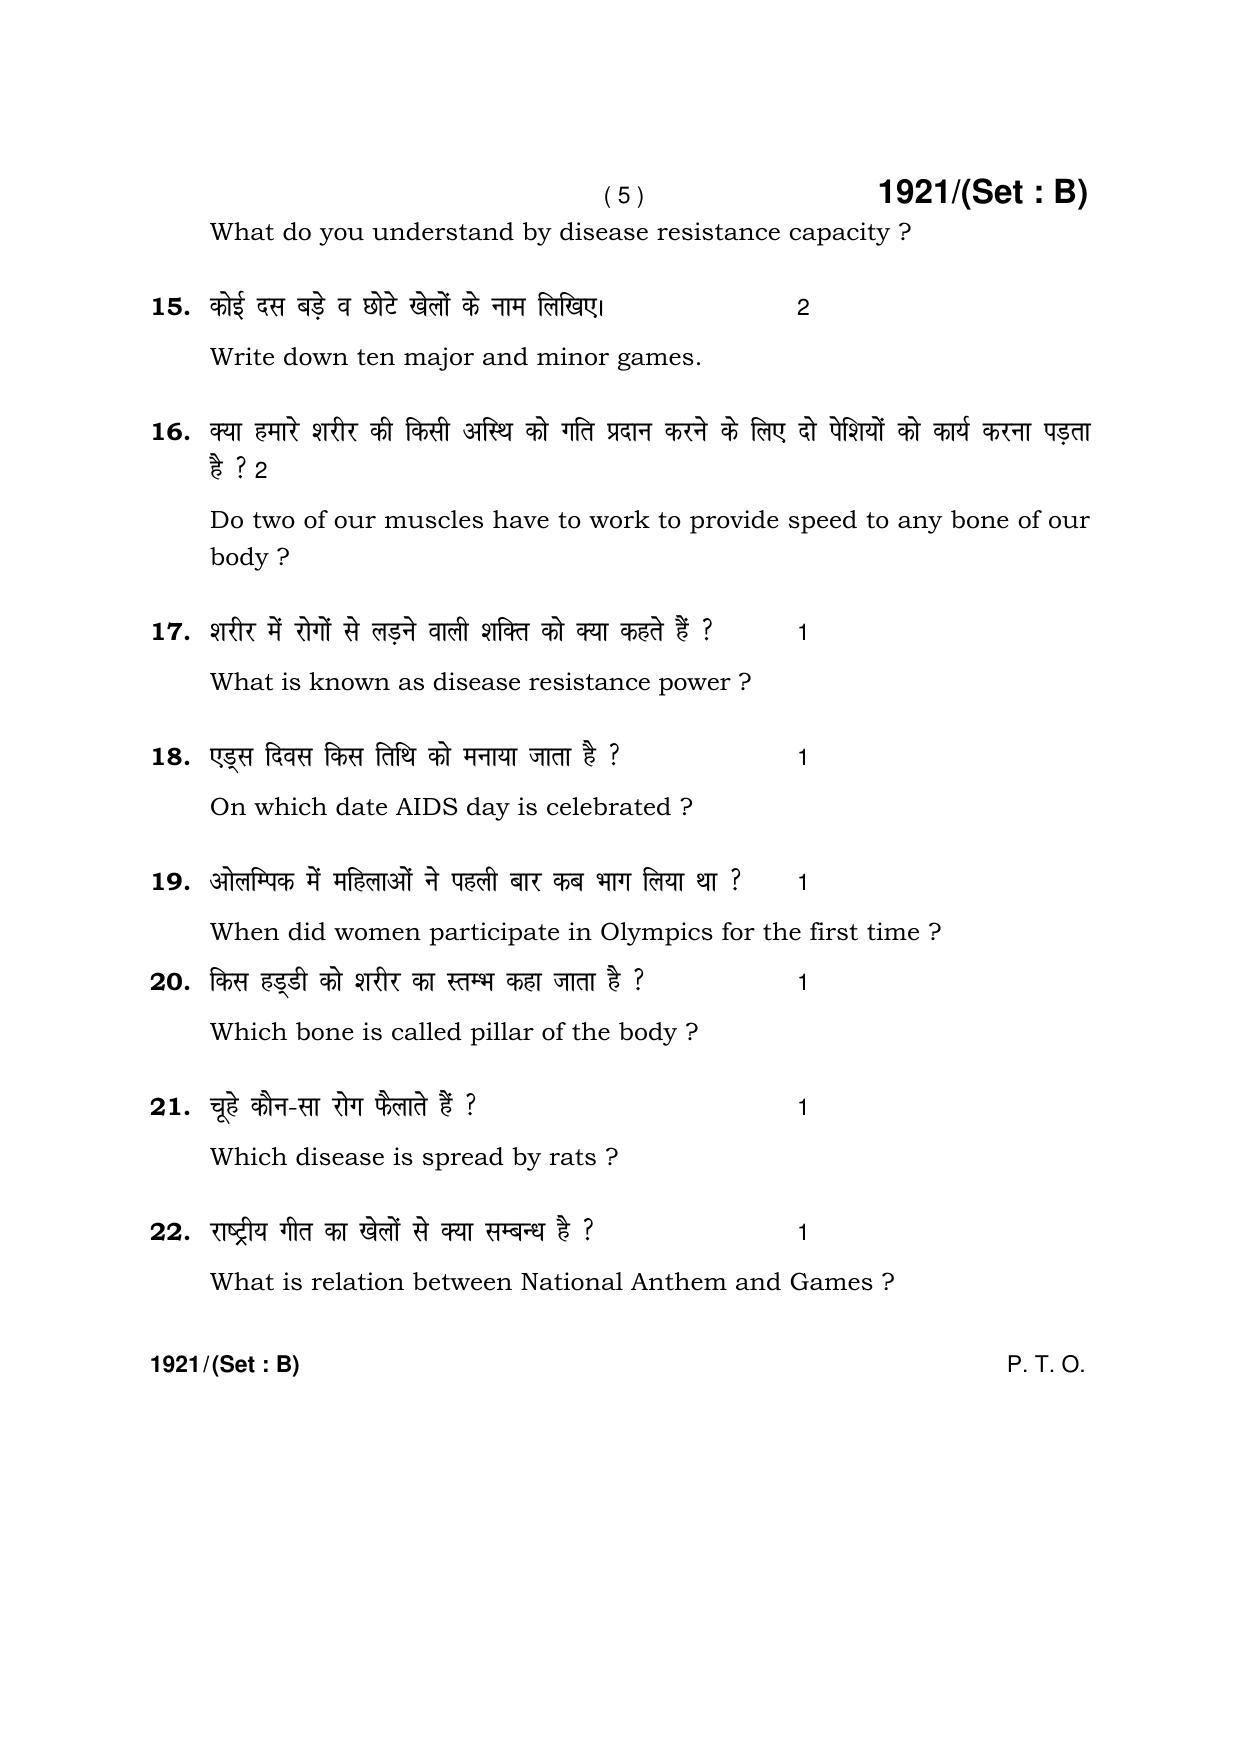 Haryana Board HBSE Class 10 Health & Physical Education -B 2017 Question Paper - Page 5